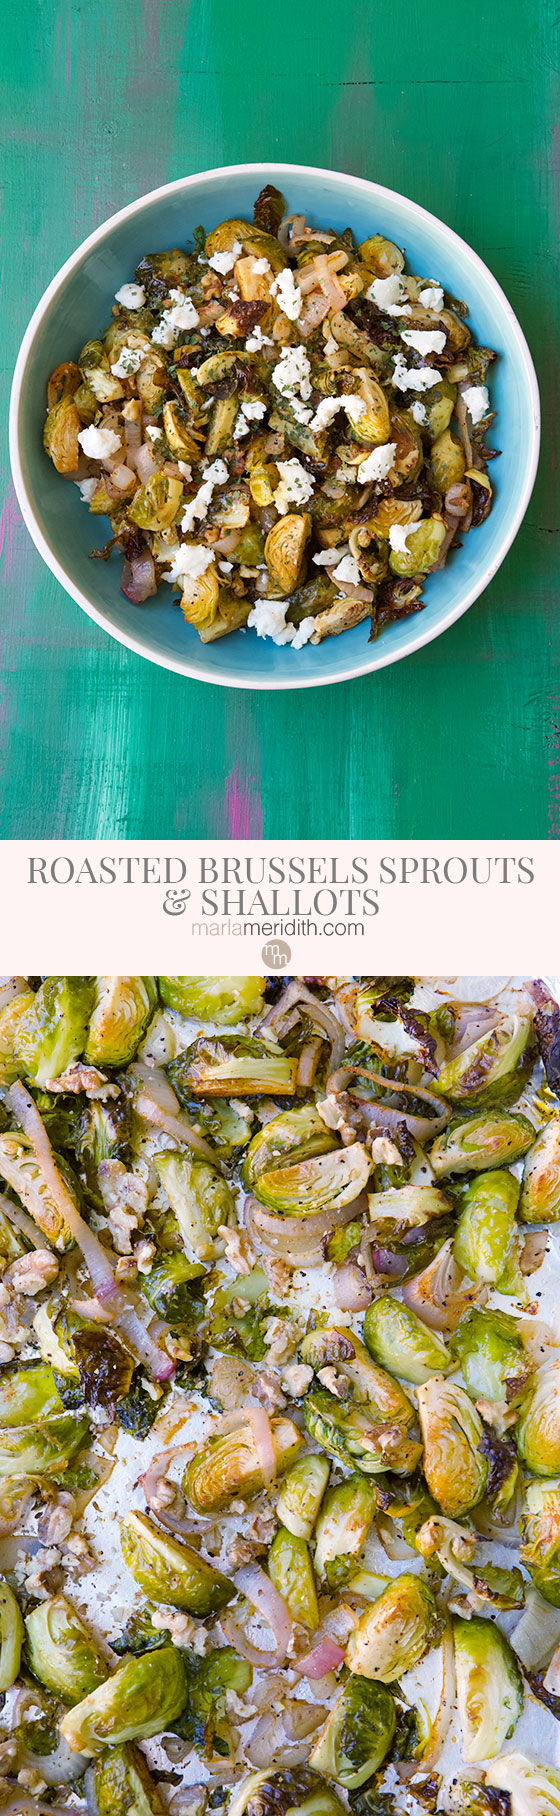 Enjoy this healthy and delicious Roasted Brussels Sprouts & Shallots recipe as a holiday side dish or add in some grains for a vegan meal. MarlaMeridith.com